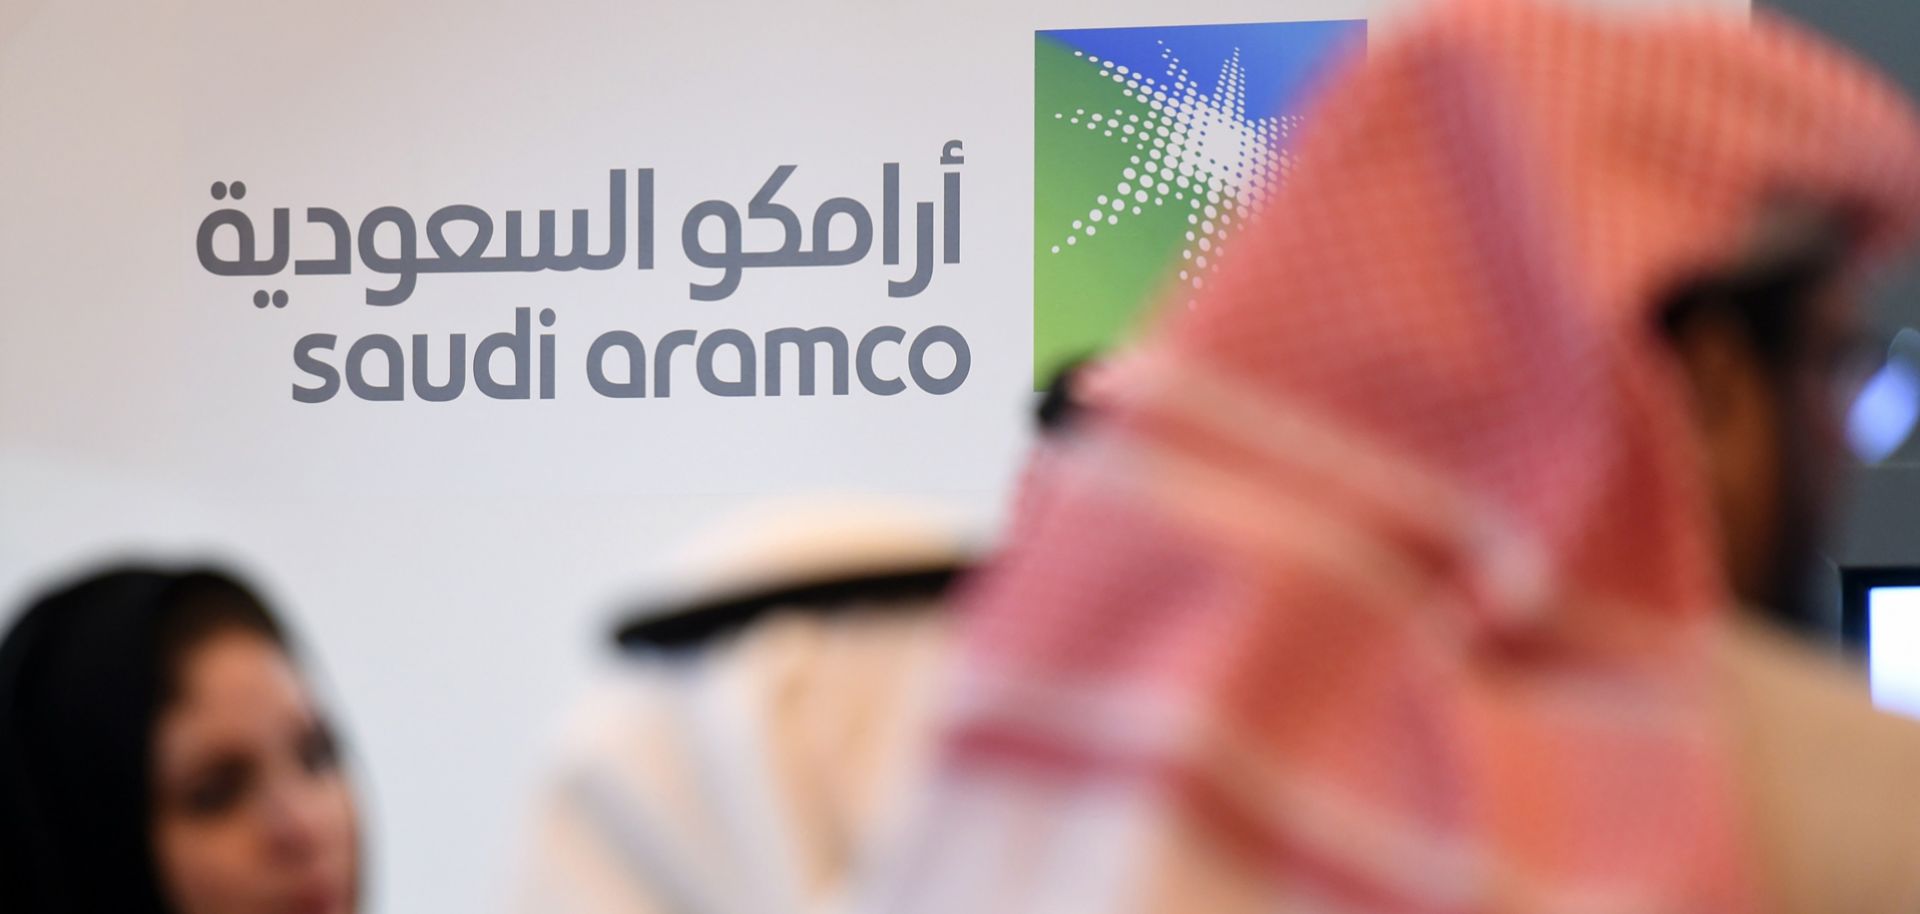 Saudi Aramco has long been criticized for its opaque practices, but the company is in the process of making its operations more transparent.